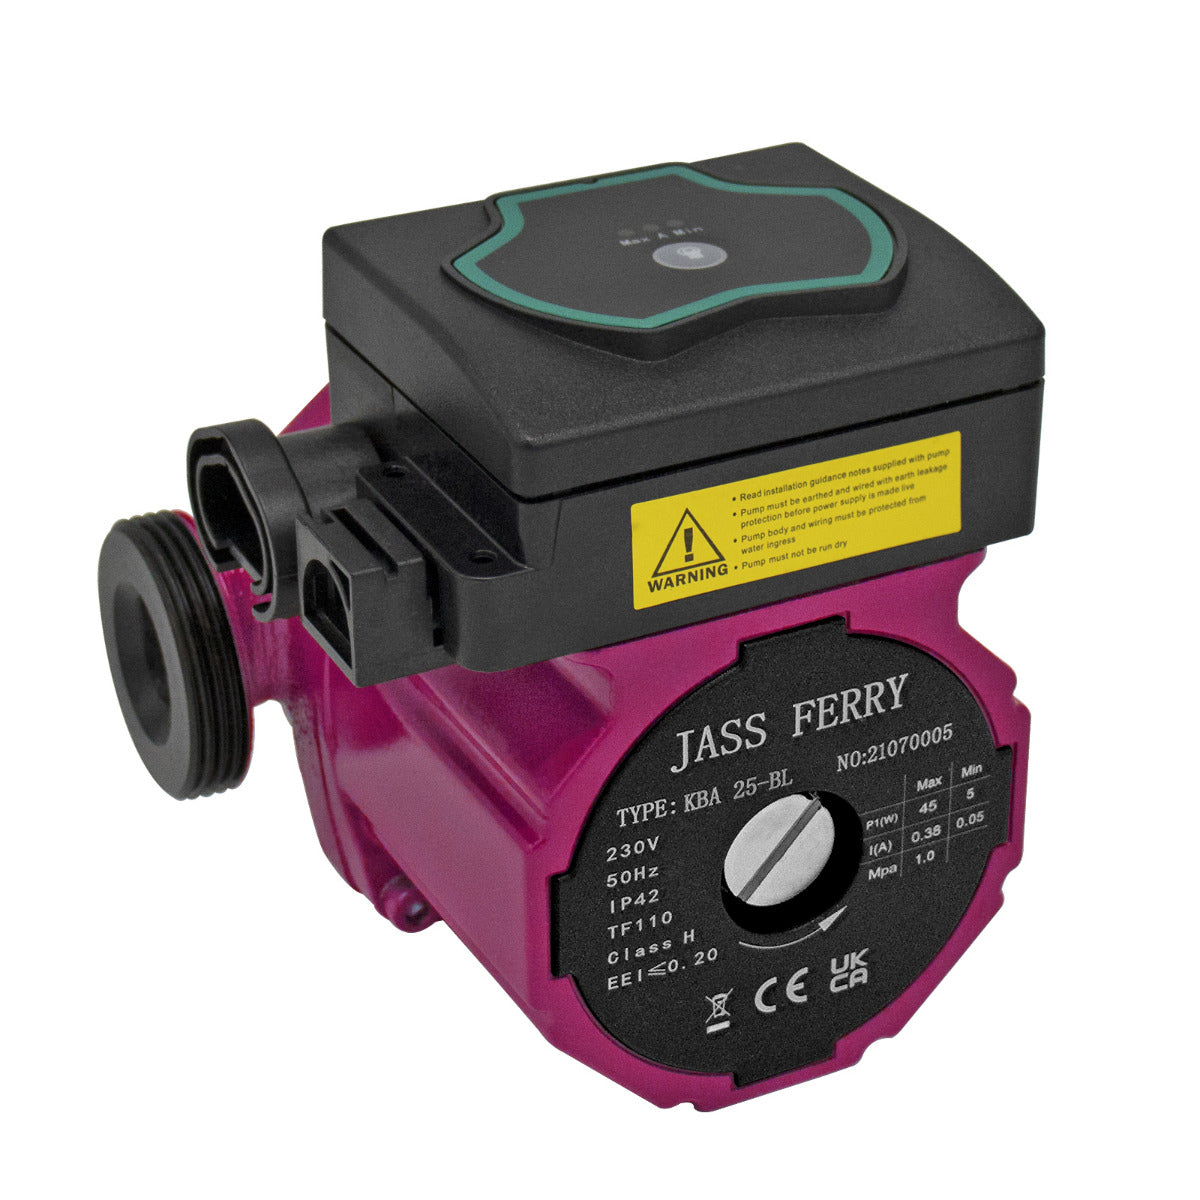 JASSFERRY A-Rated Central Heating Pump Energy Saving Hot Water Circulation Systems